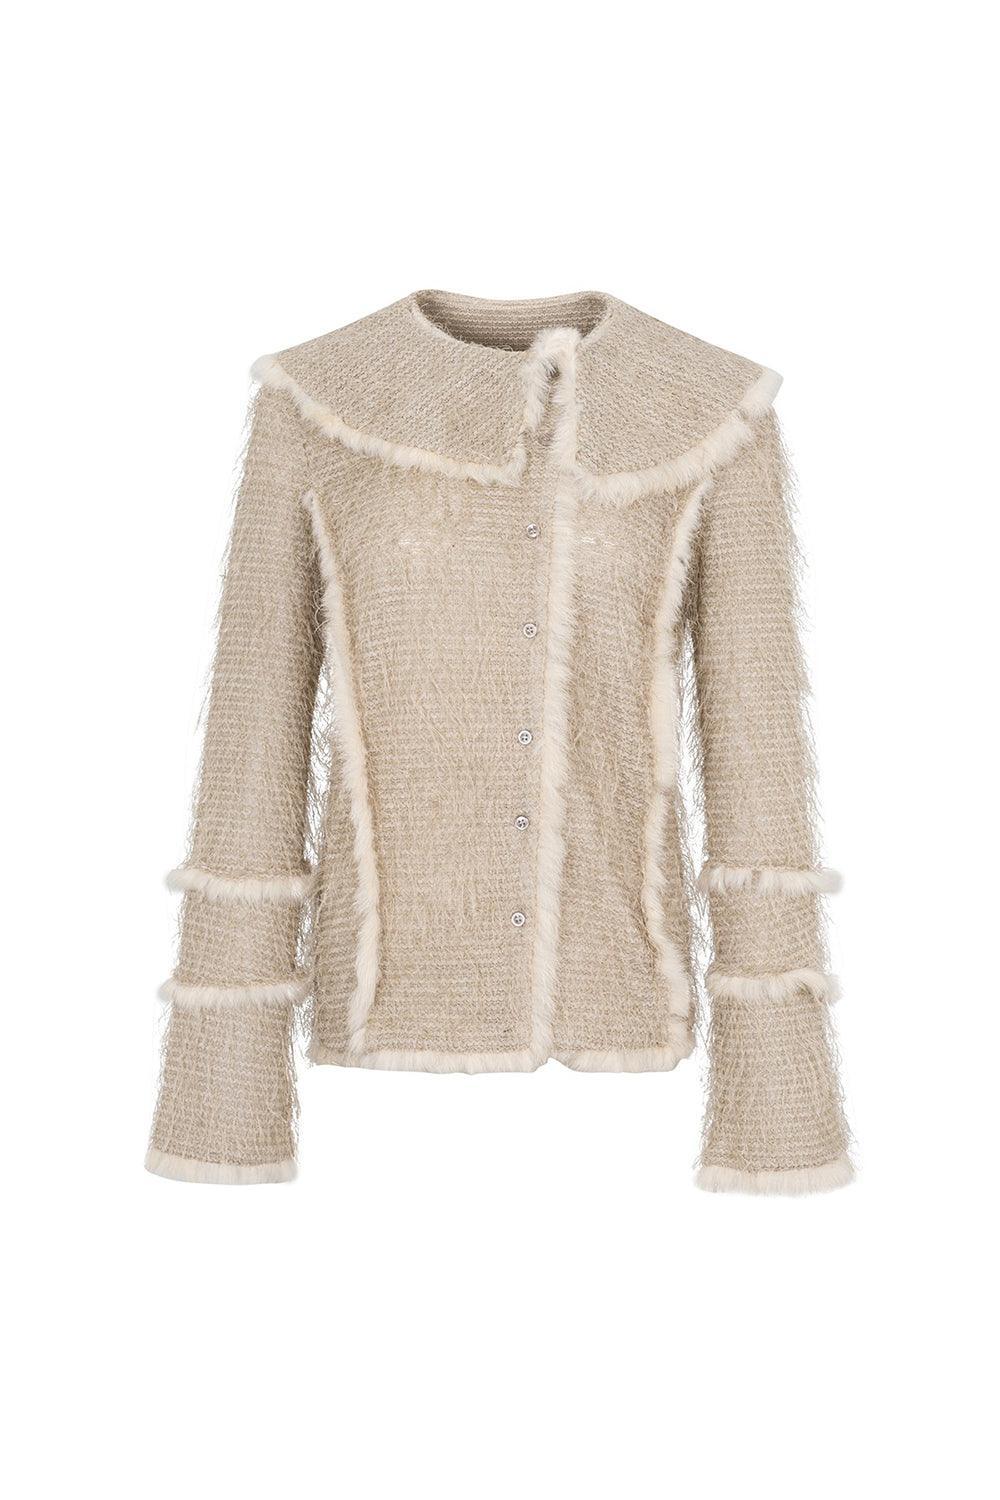 Lapped Asymmetric Knitted Sweater - Pixie Rebels